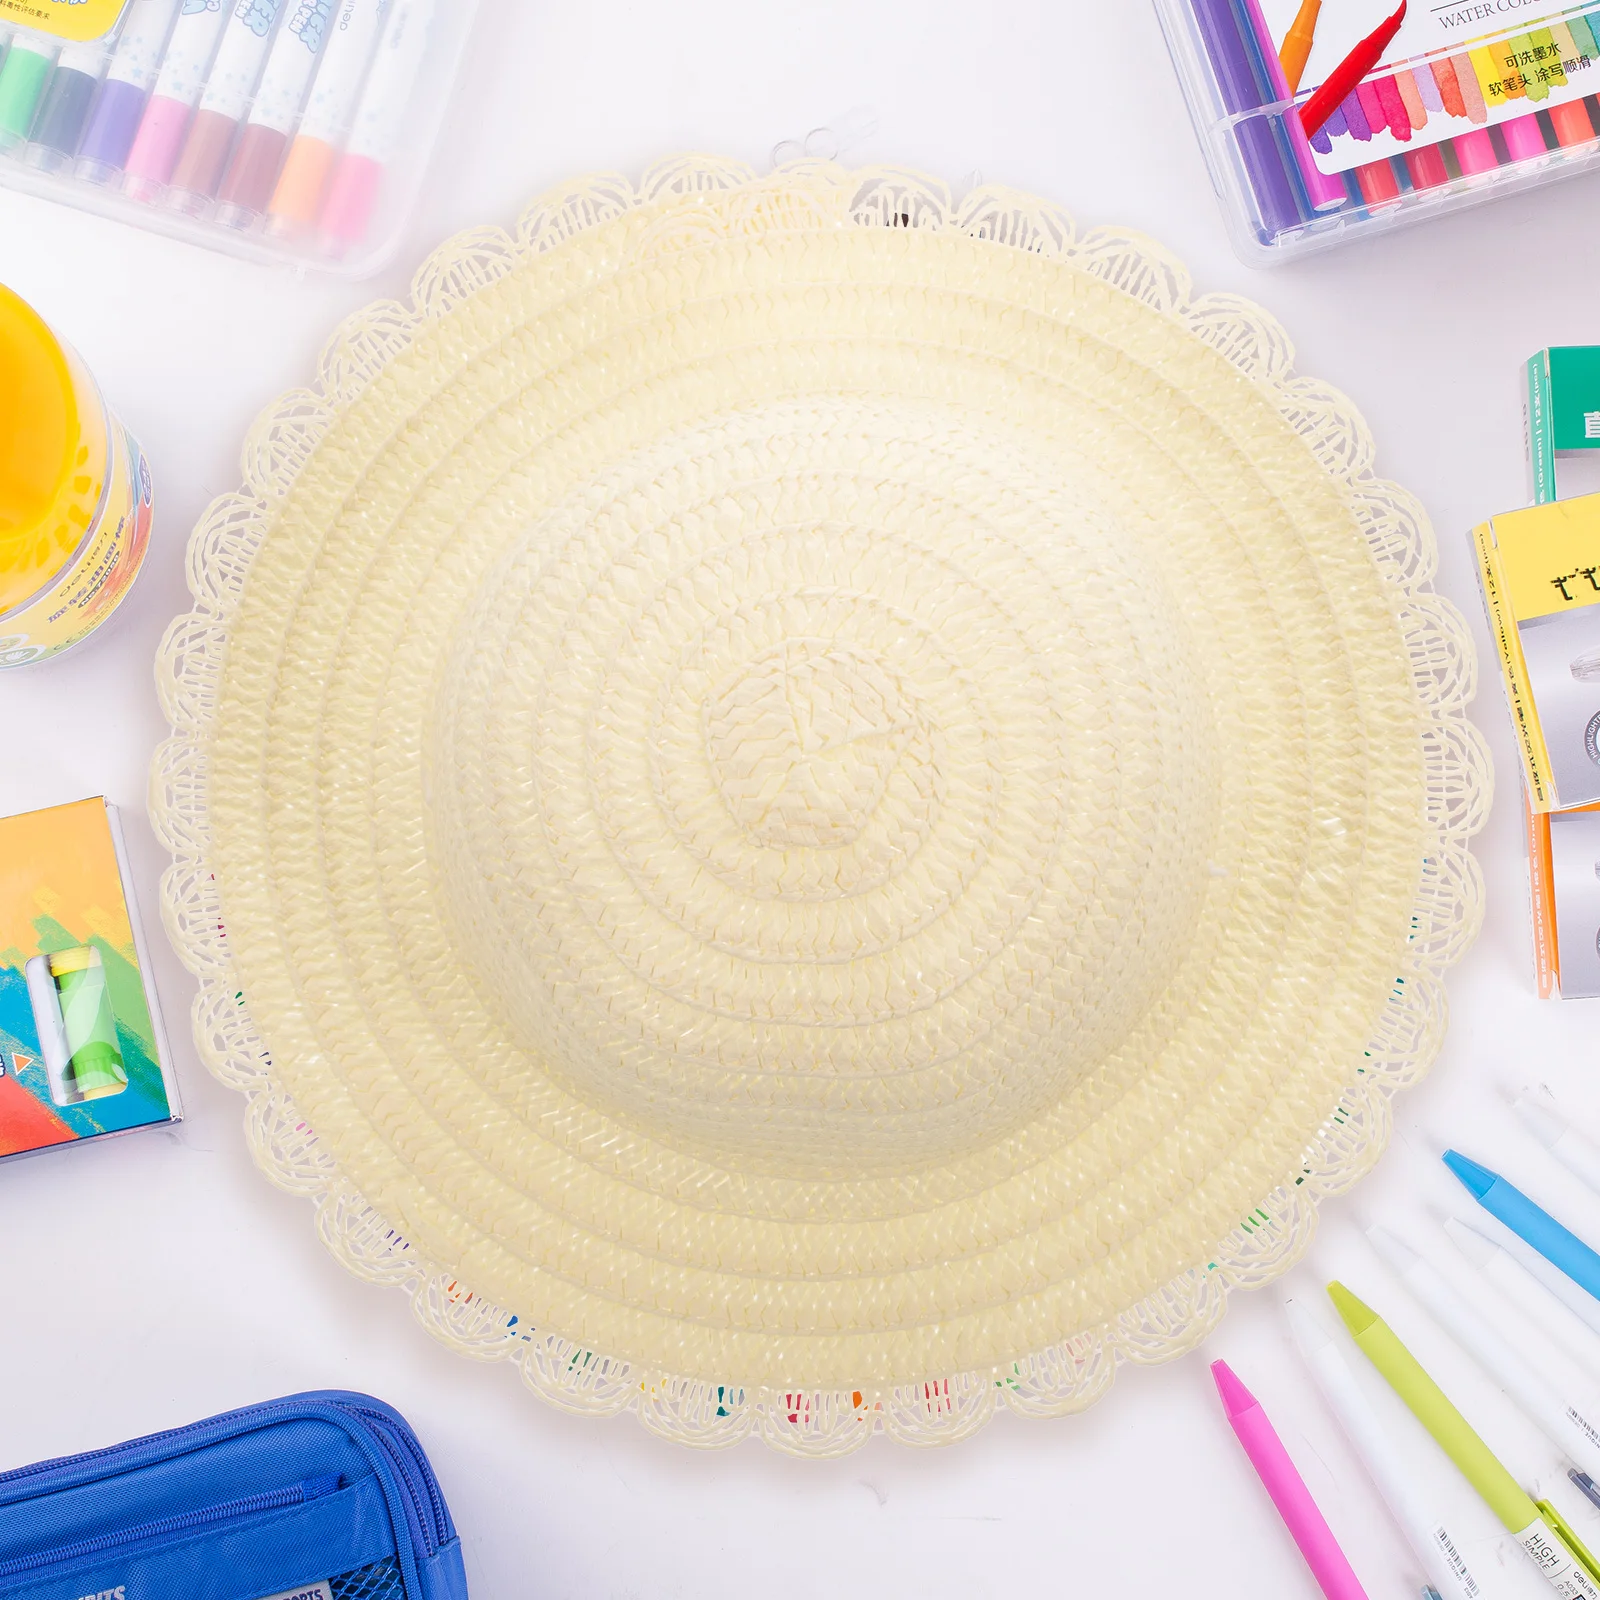 

Gadpiparty Diy Straw Hats Set Unpainted White Straw Hat Handmade Cap Beach Sun Hat Tea Party Dress Up Hat Mexican Straw Hat